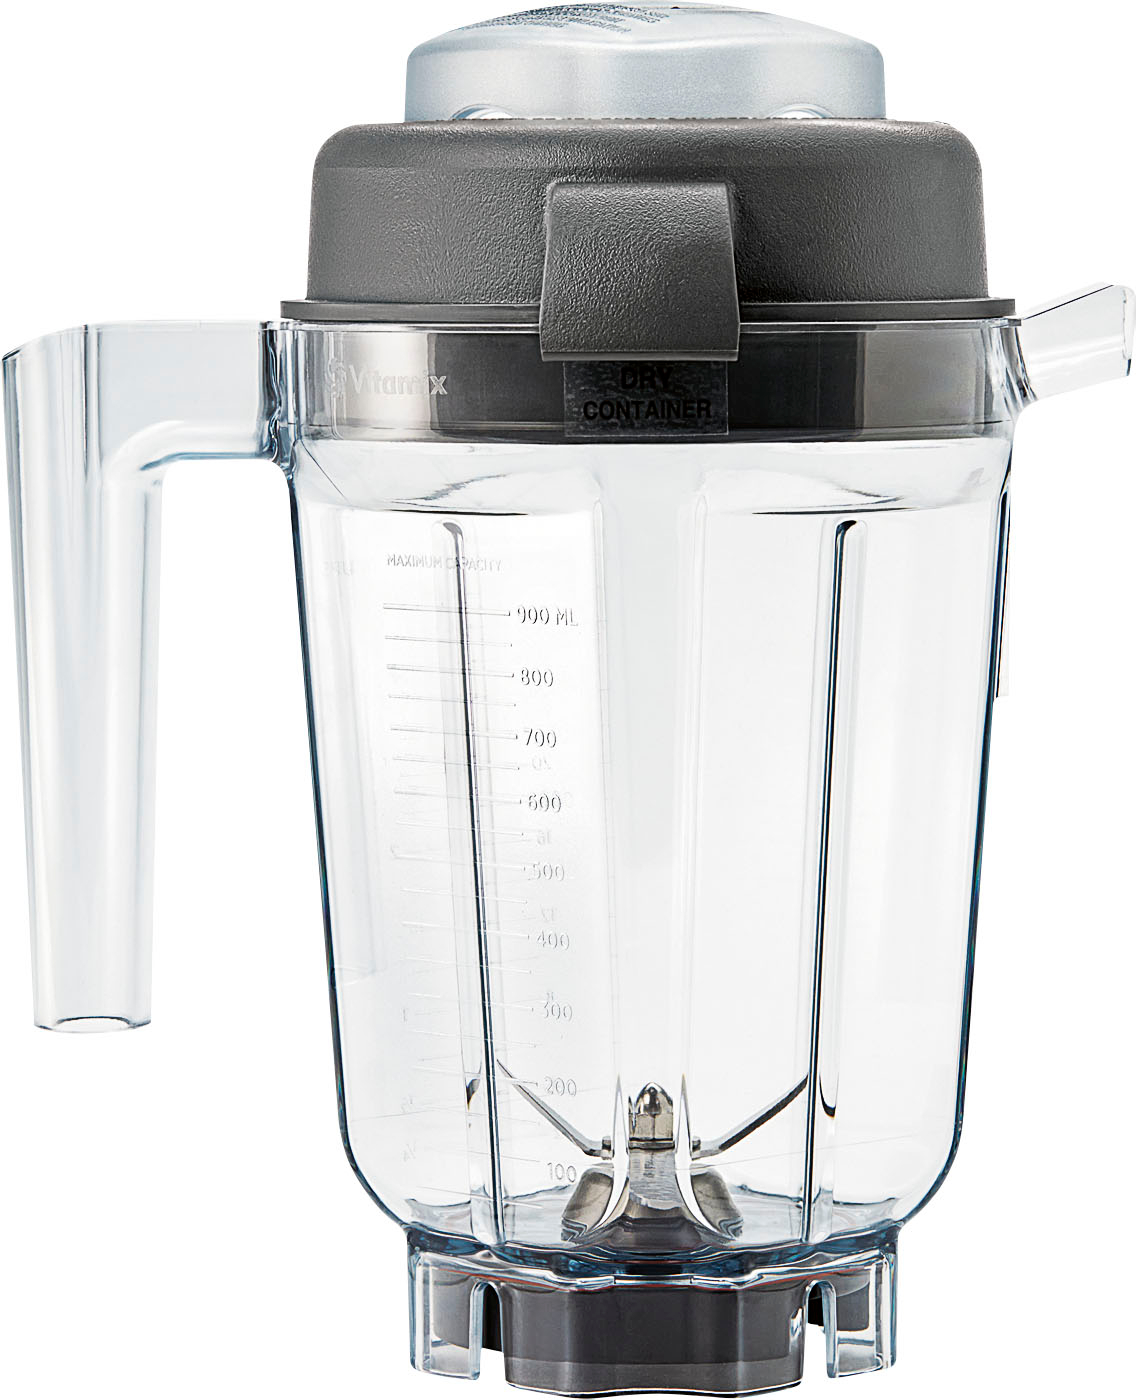 Angle View: Vitamix - Ascent Blending Cup Accessory - none